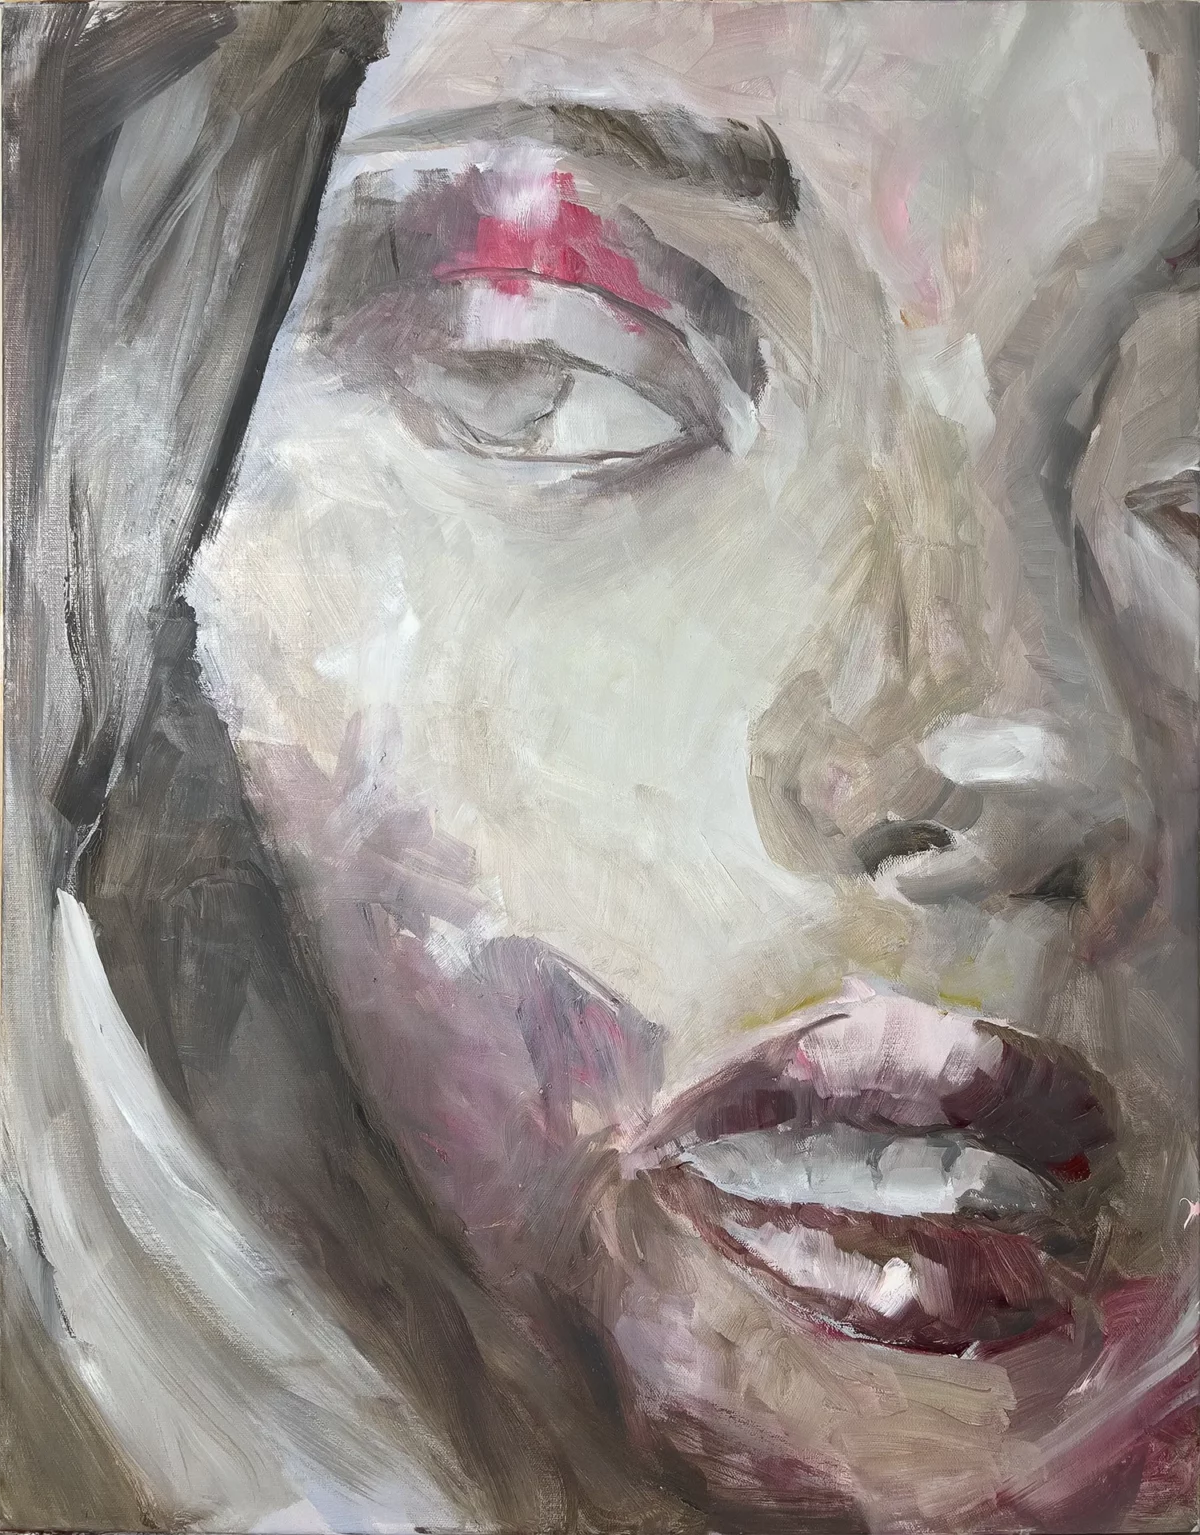 Oil painting 'Before and After' by Alex Righetto, a 22 x 28 inch vertical canvas from the Studio Collection, portraying abstract expressionism and exploration of the female form.